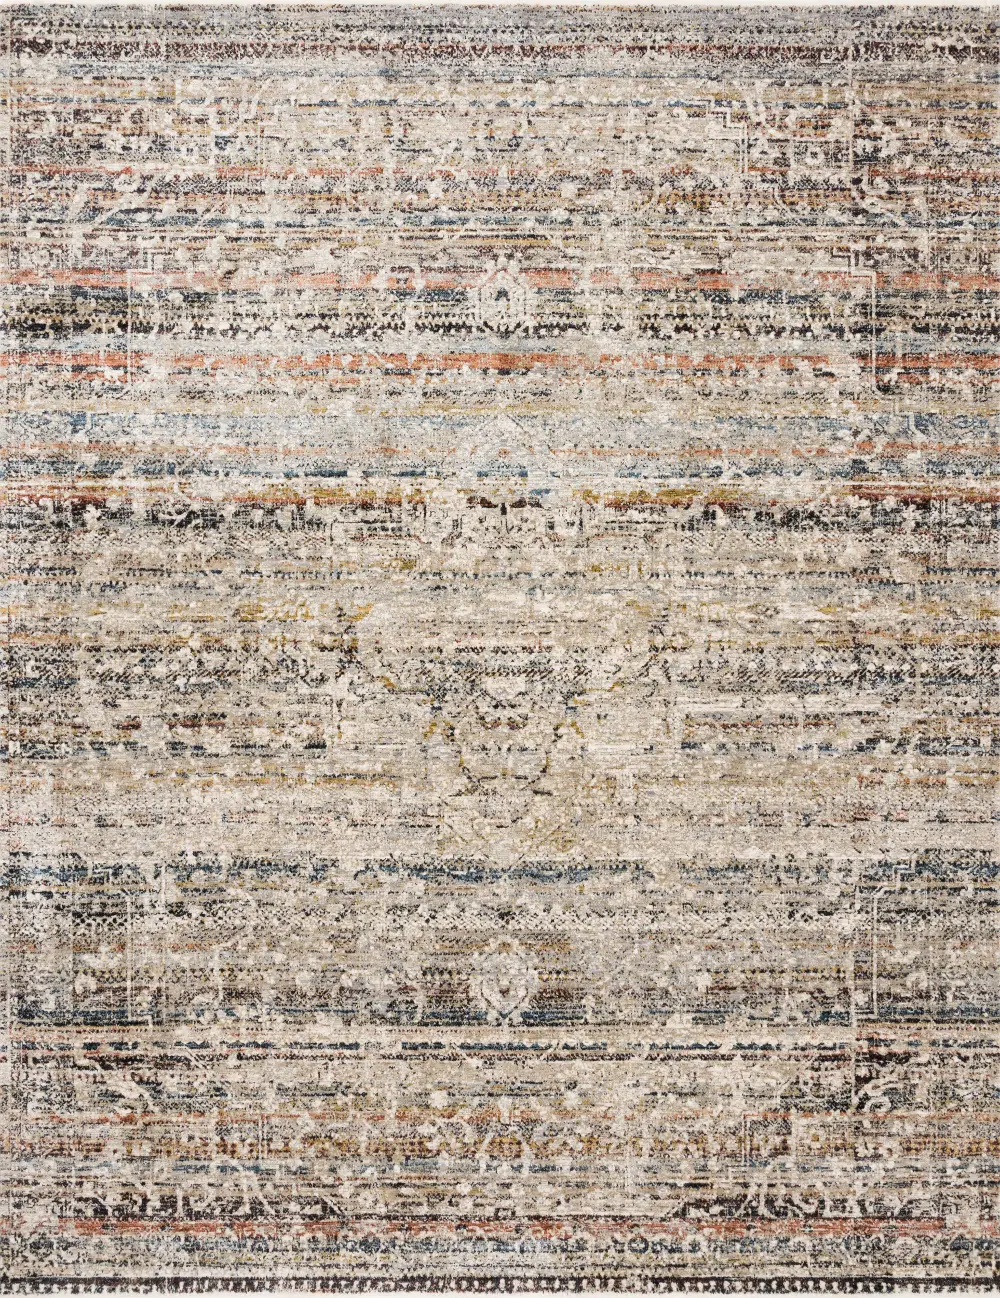 THE-03/5X8/THEIA Theia 5 x 8 Taupe and Multi-Colored Area Rug-1